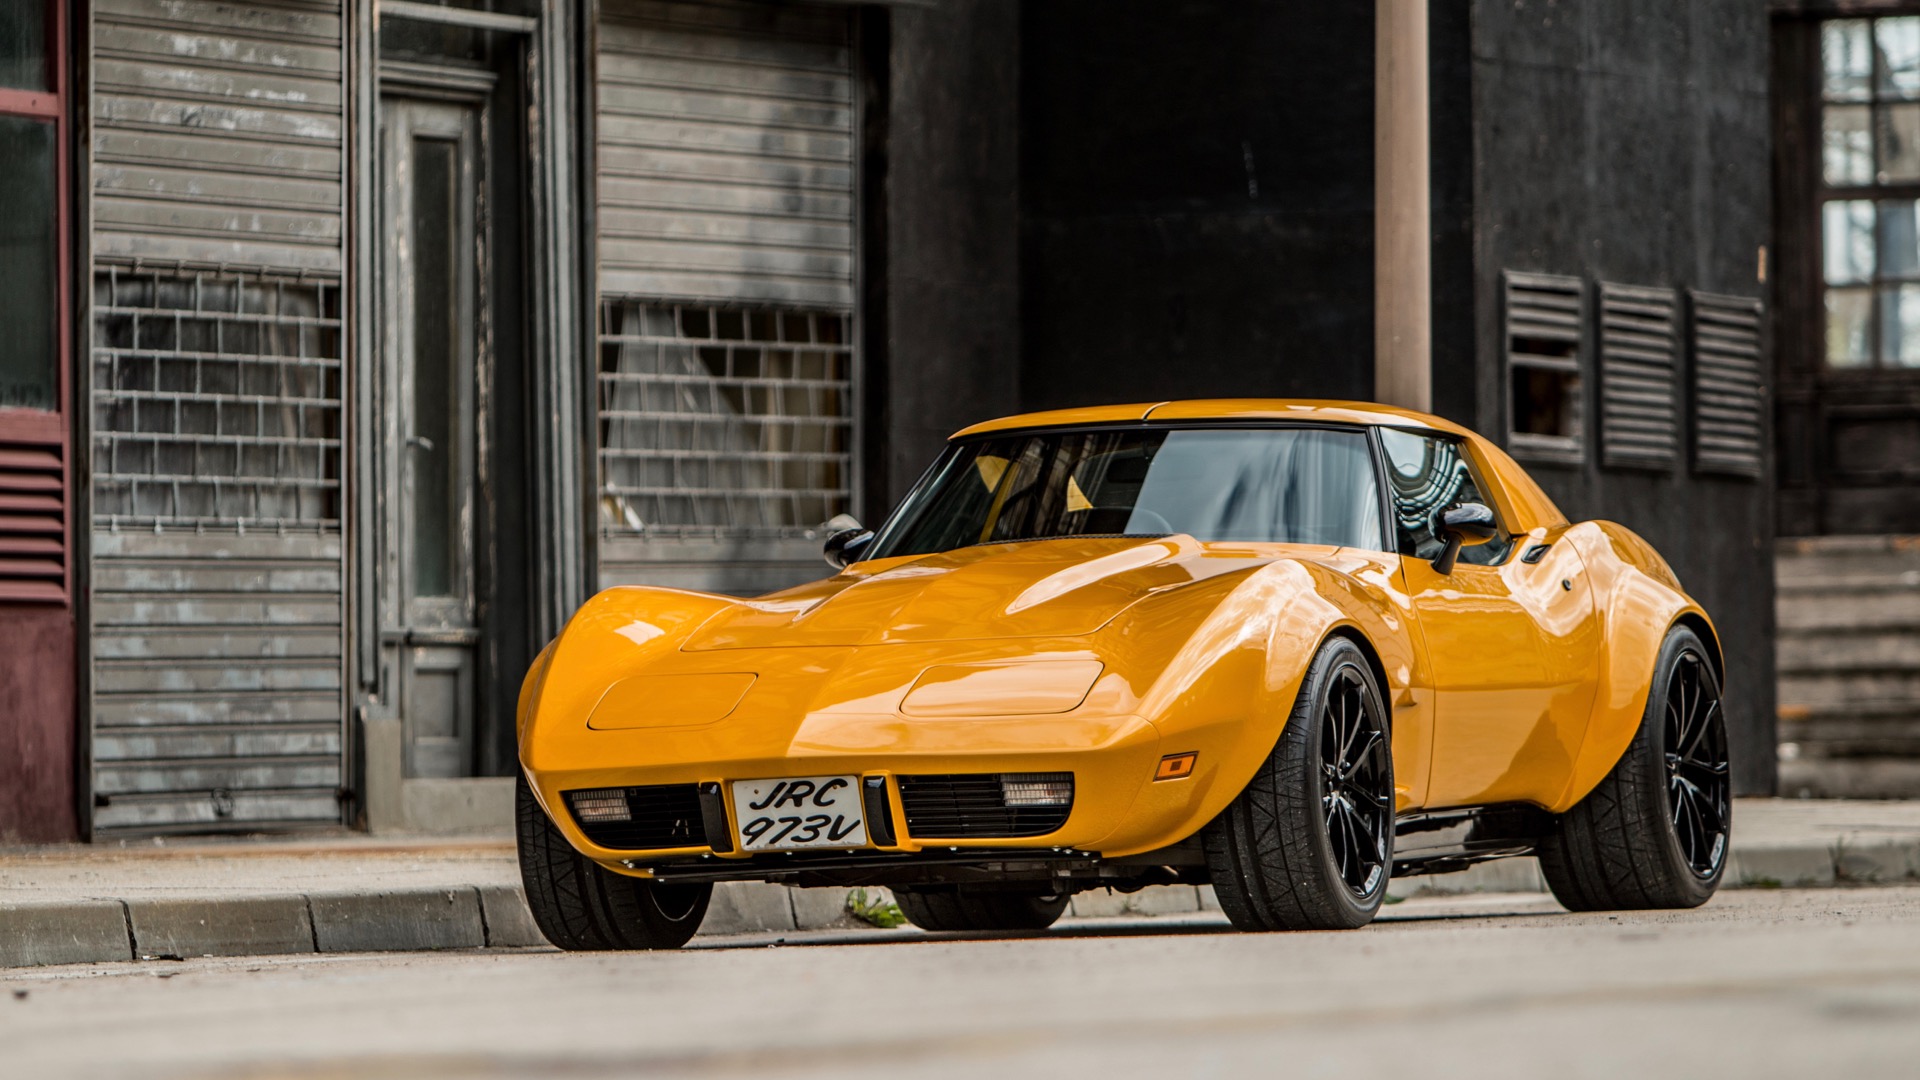 Check out this incredible 1976 Corvette Restomod!